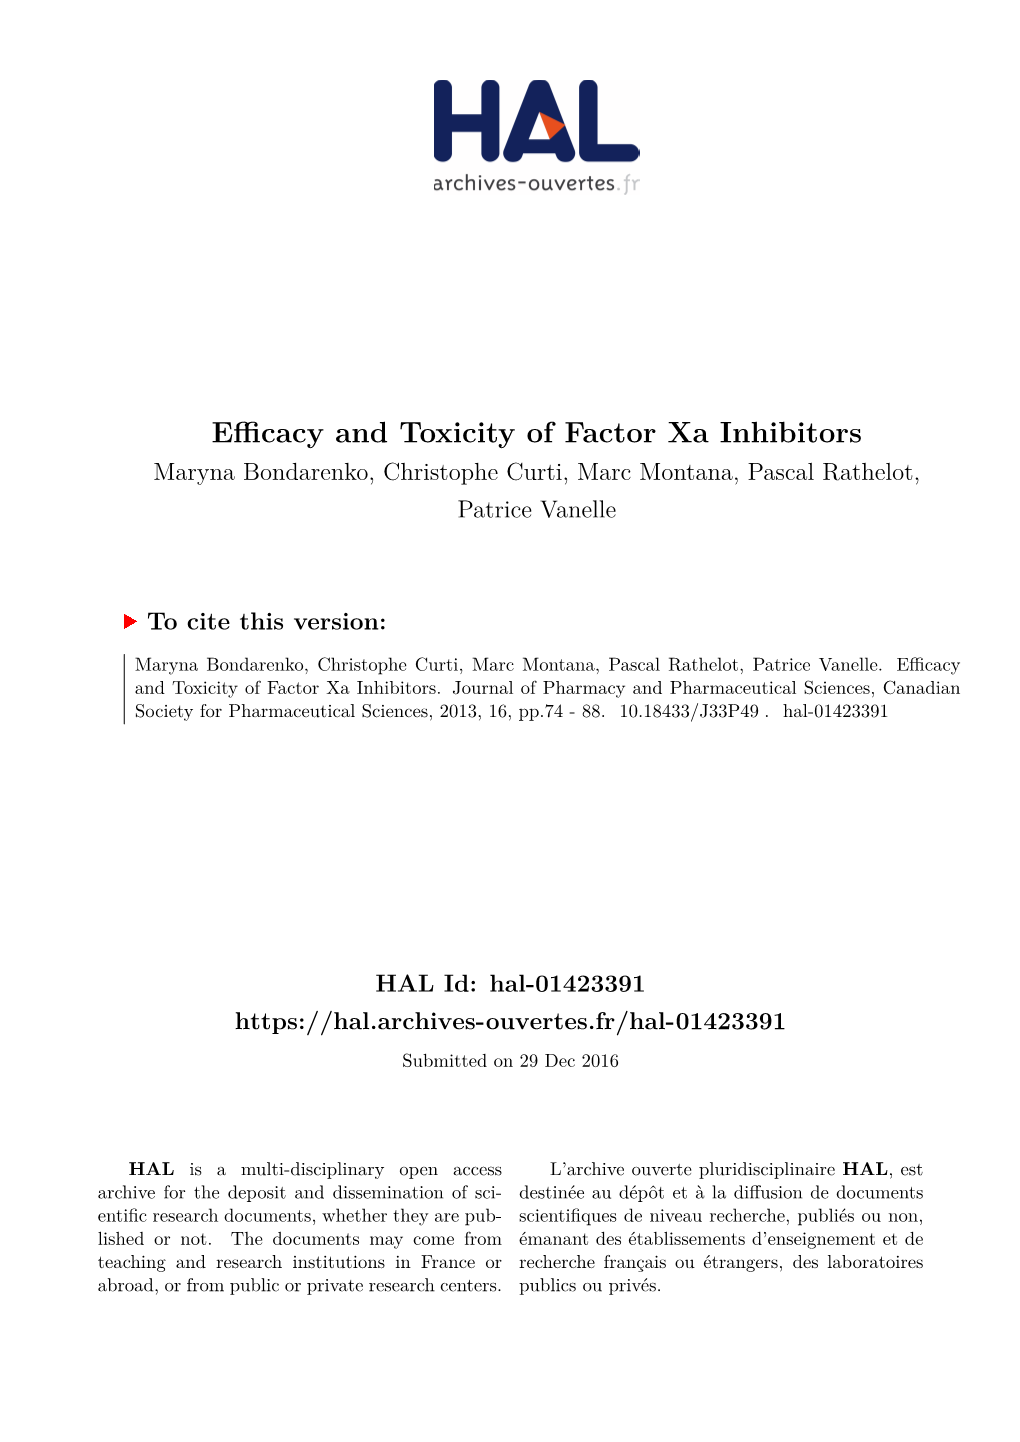 Efficacy and Toxicity of Factor Xa Inhibitors